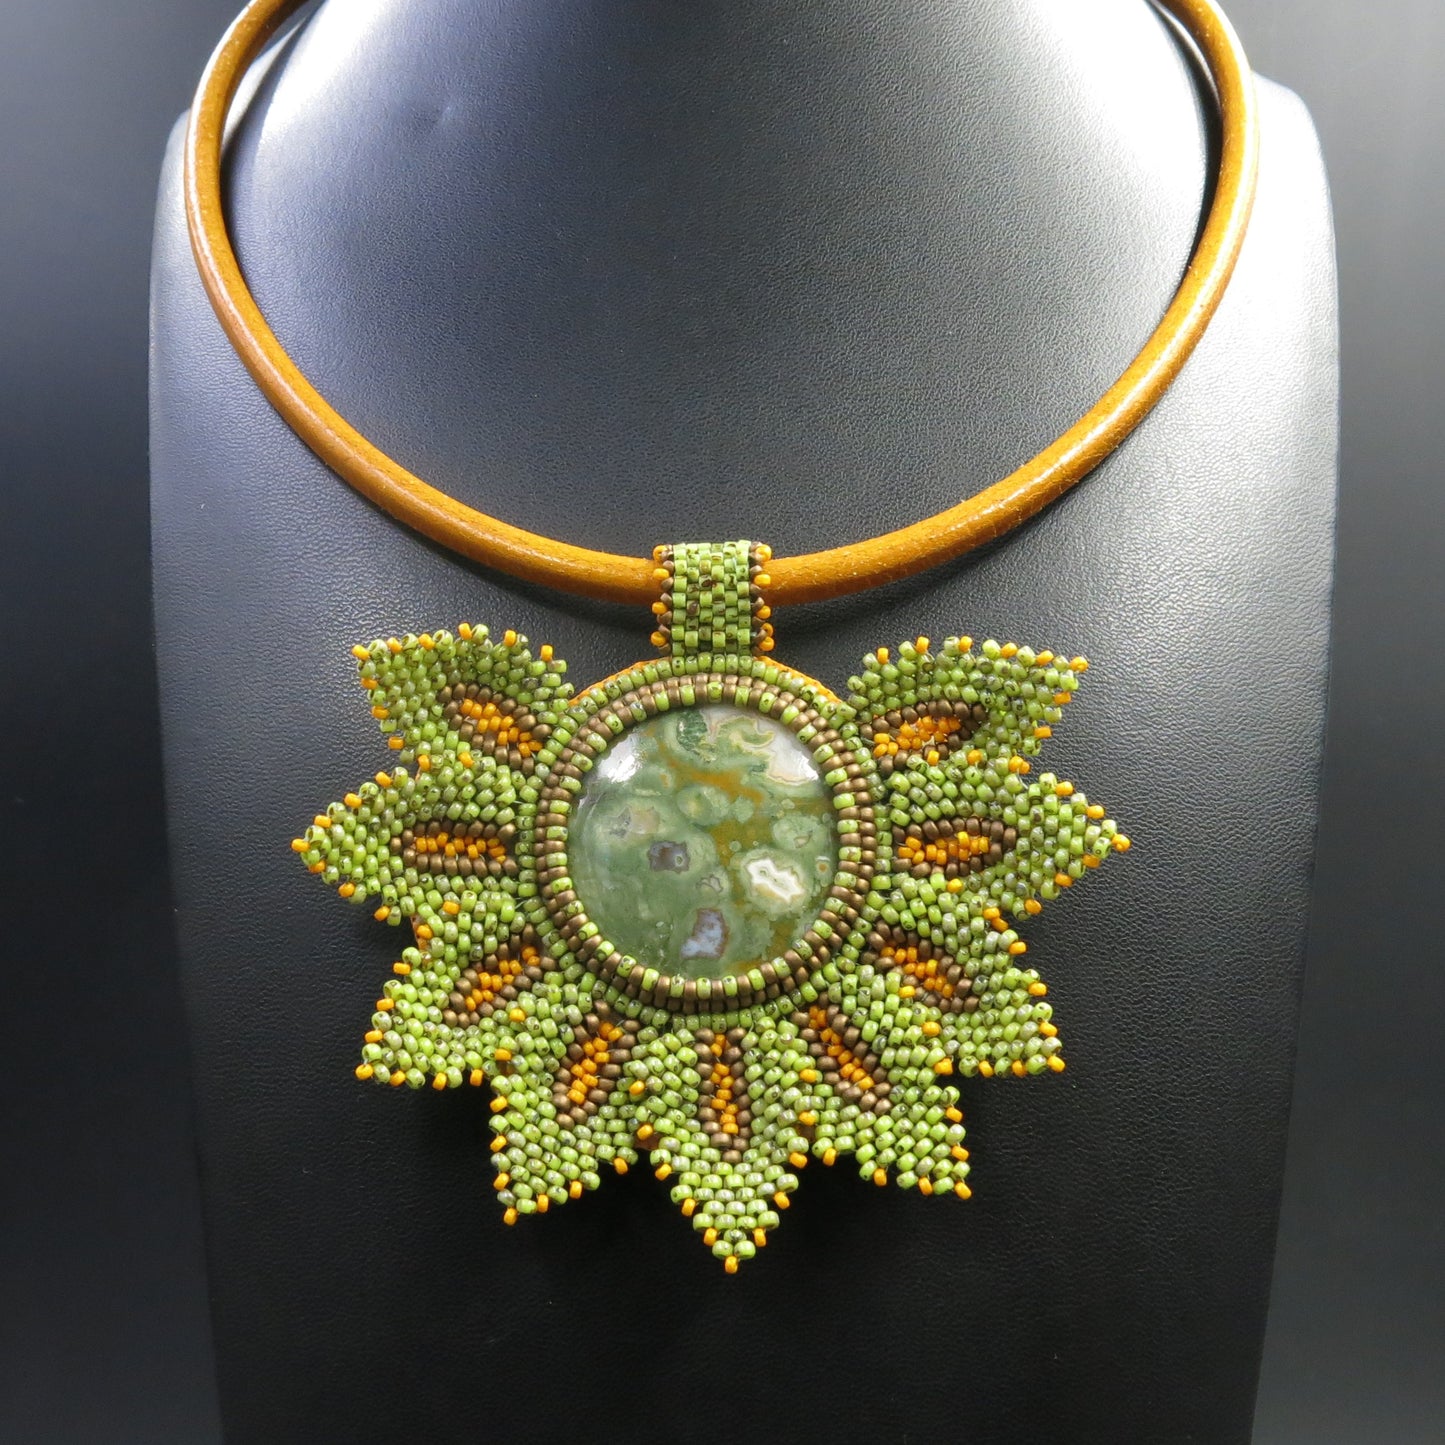 Embroidered necklace with rhyolite jasper